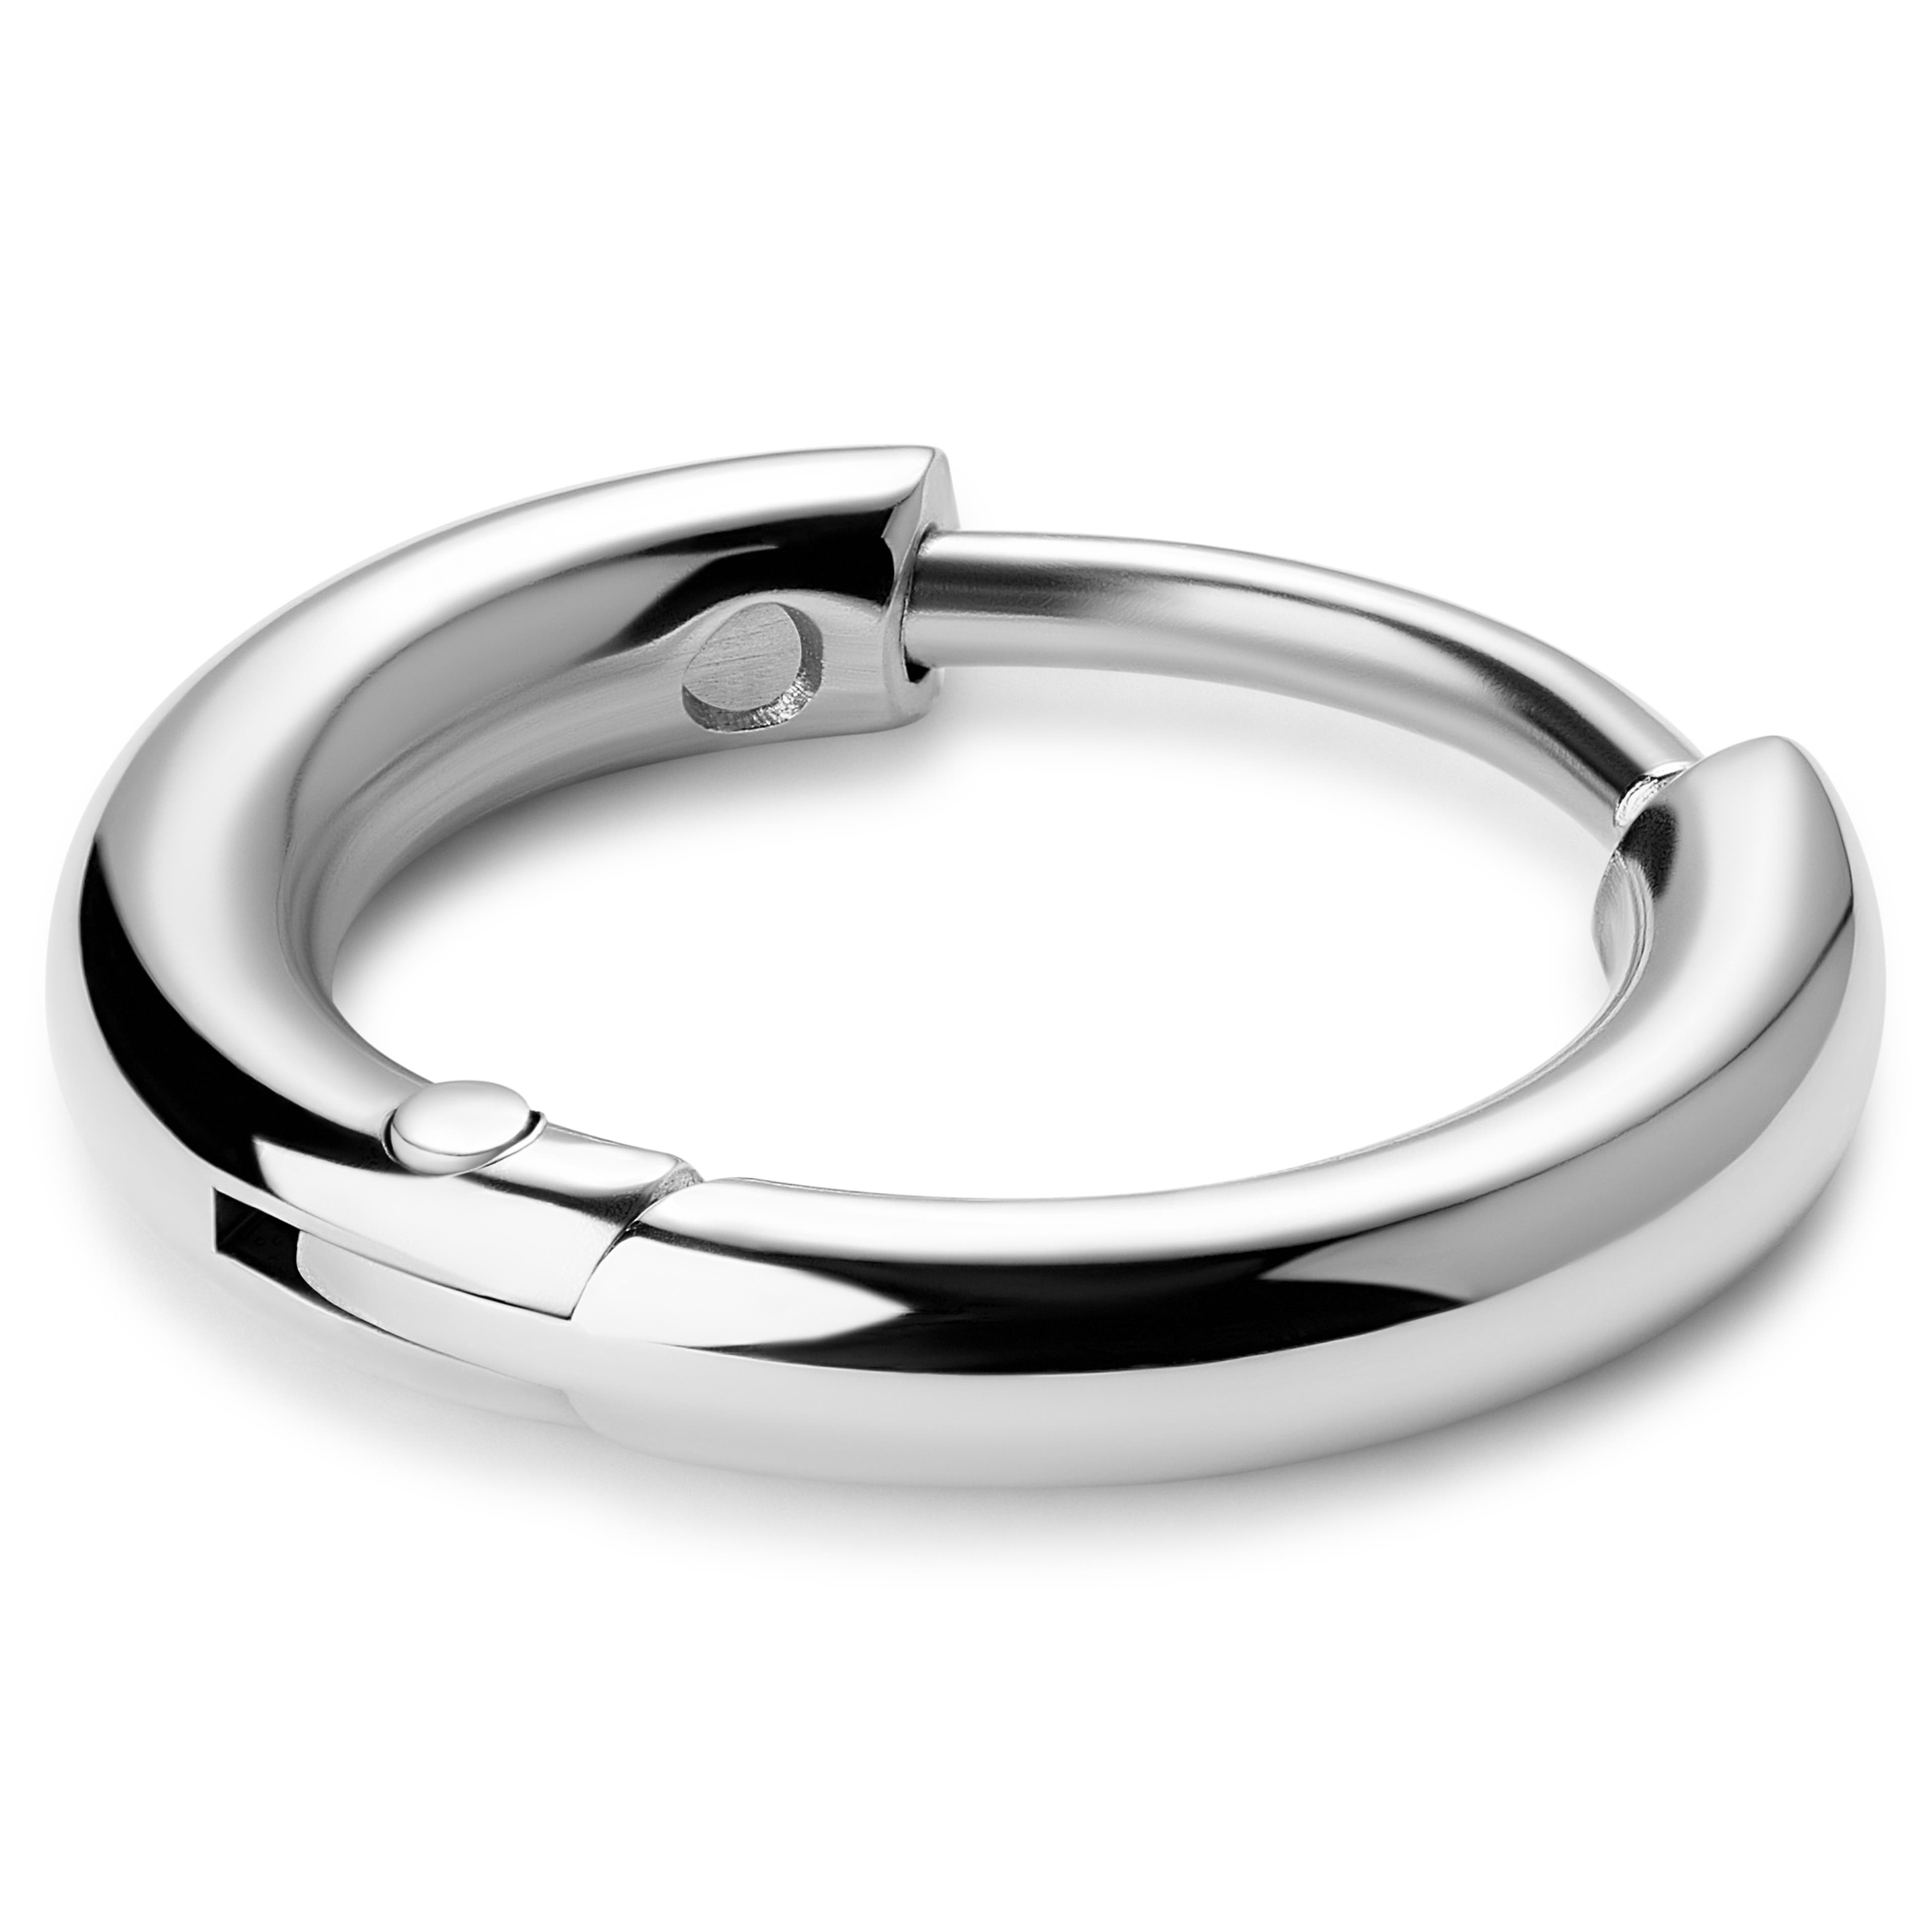 Huggie | 6 mm Surgical Stainless Steel Hoop Earring | In stock! | Lucleon